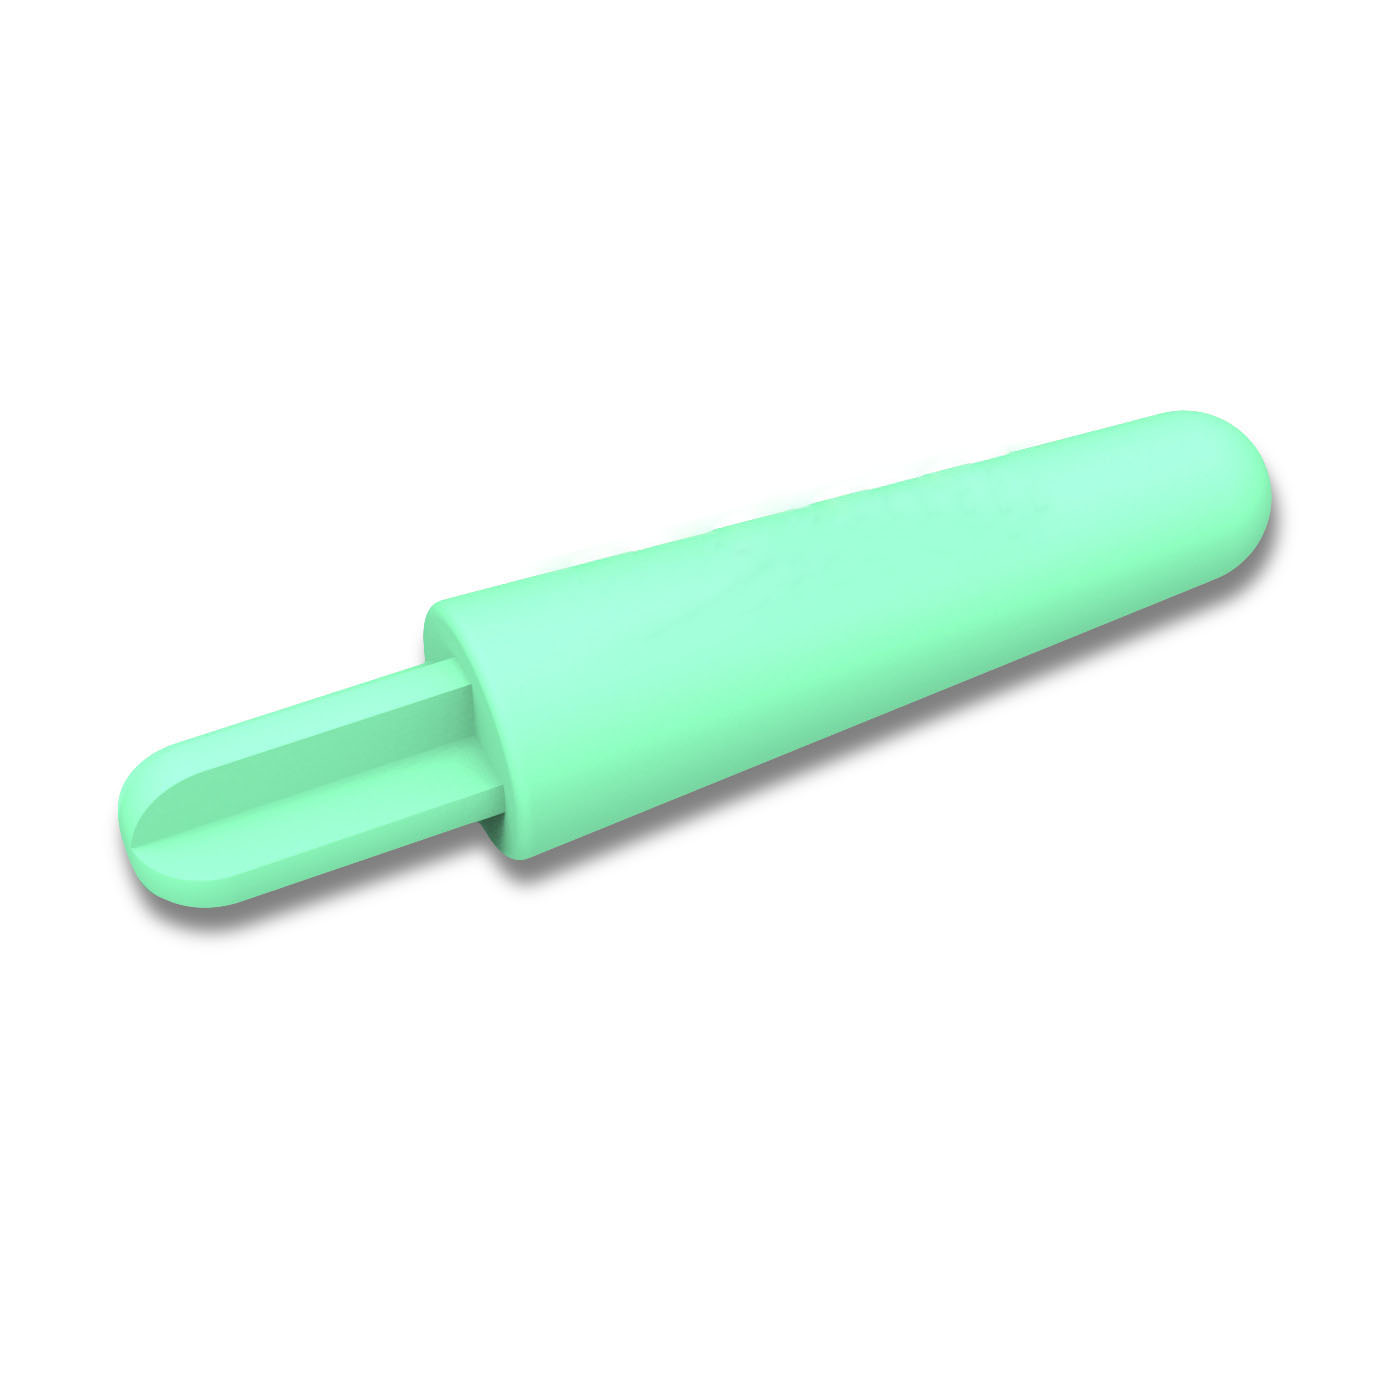 Soft-Silicone-Earpick-Safe-Earwax-Removal-Spiral-Ear-Pick-Cleaner-Remover-Stick-1256100